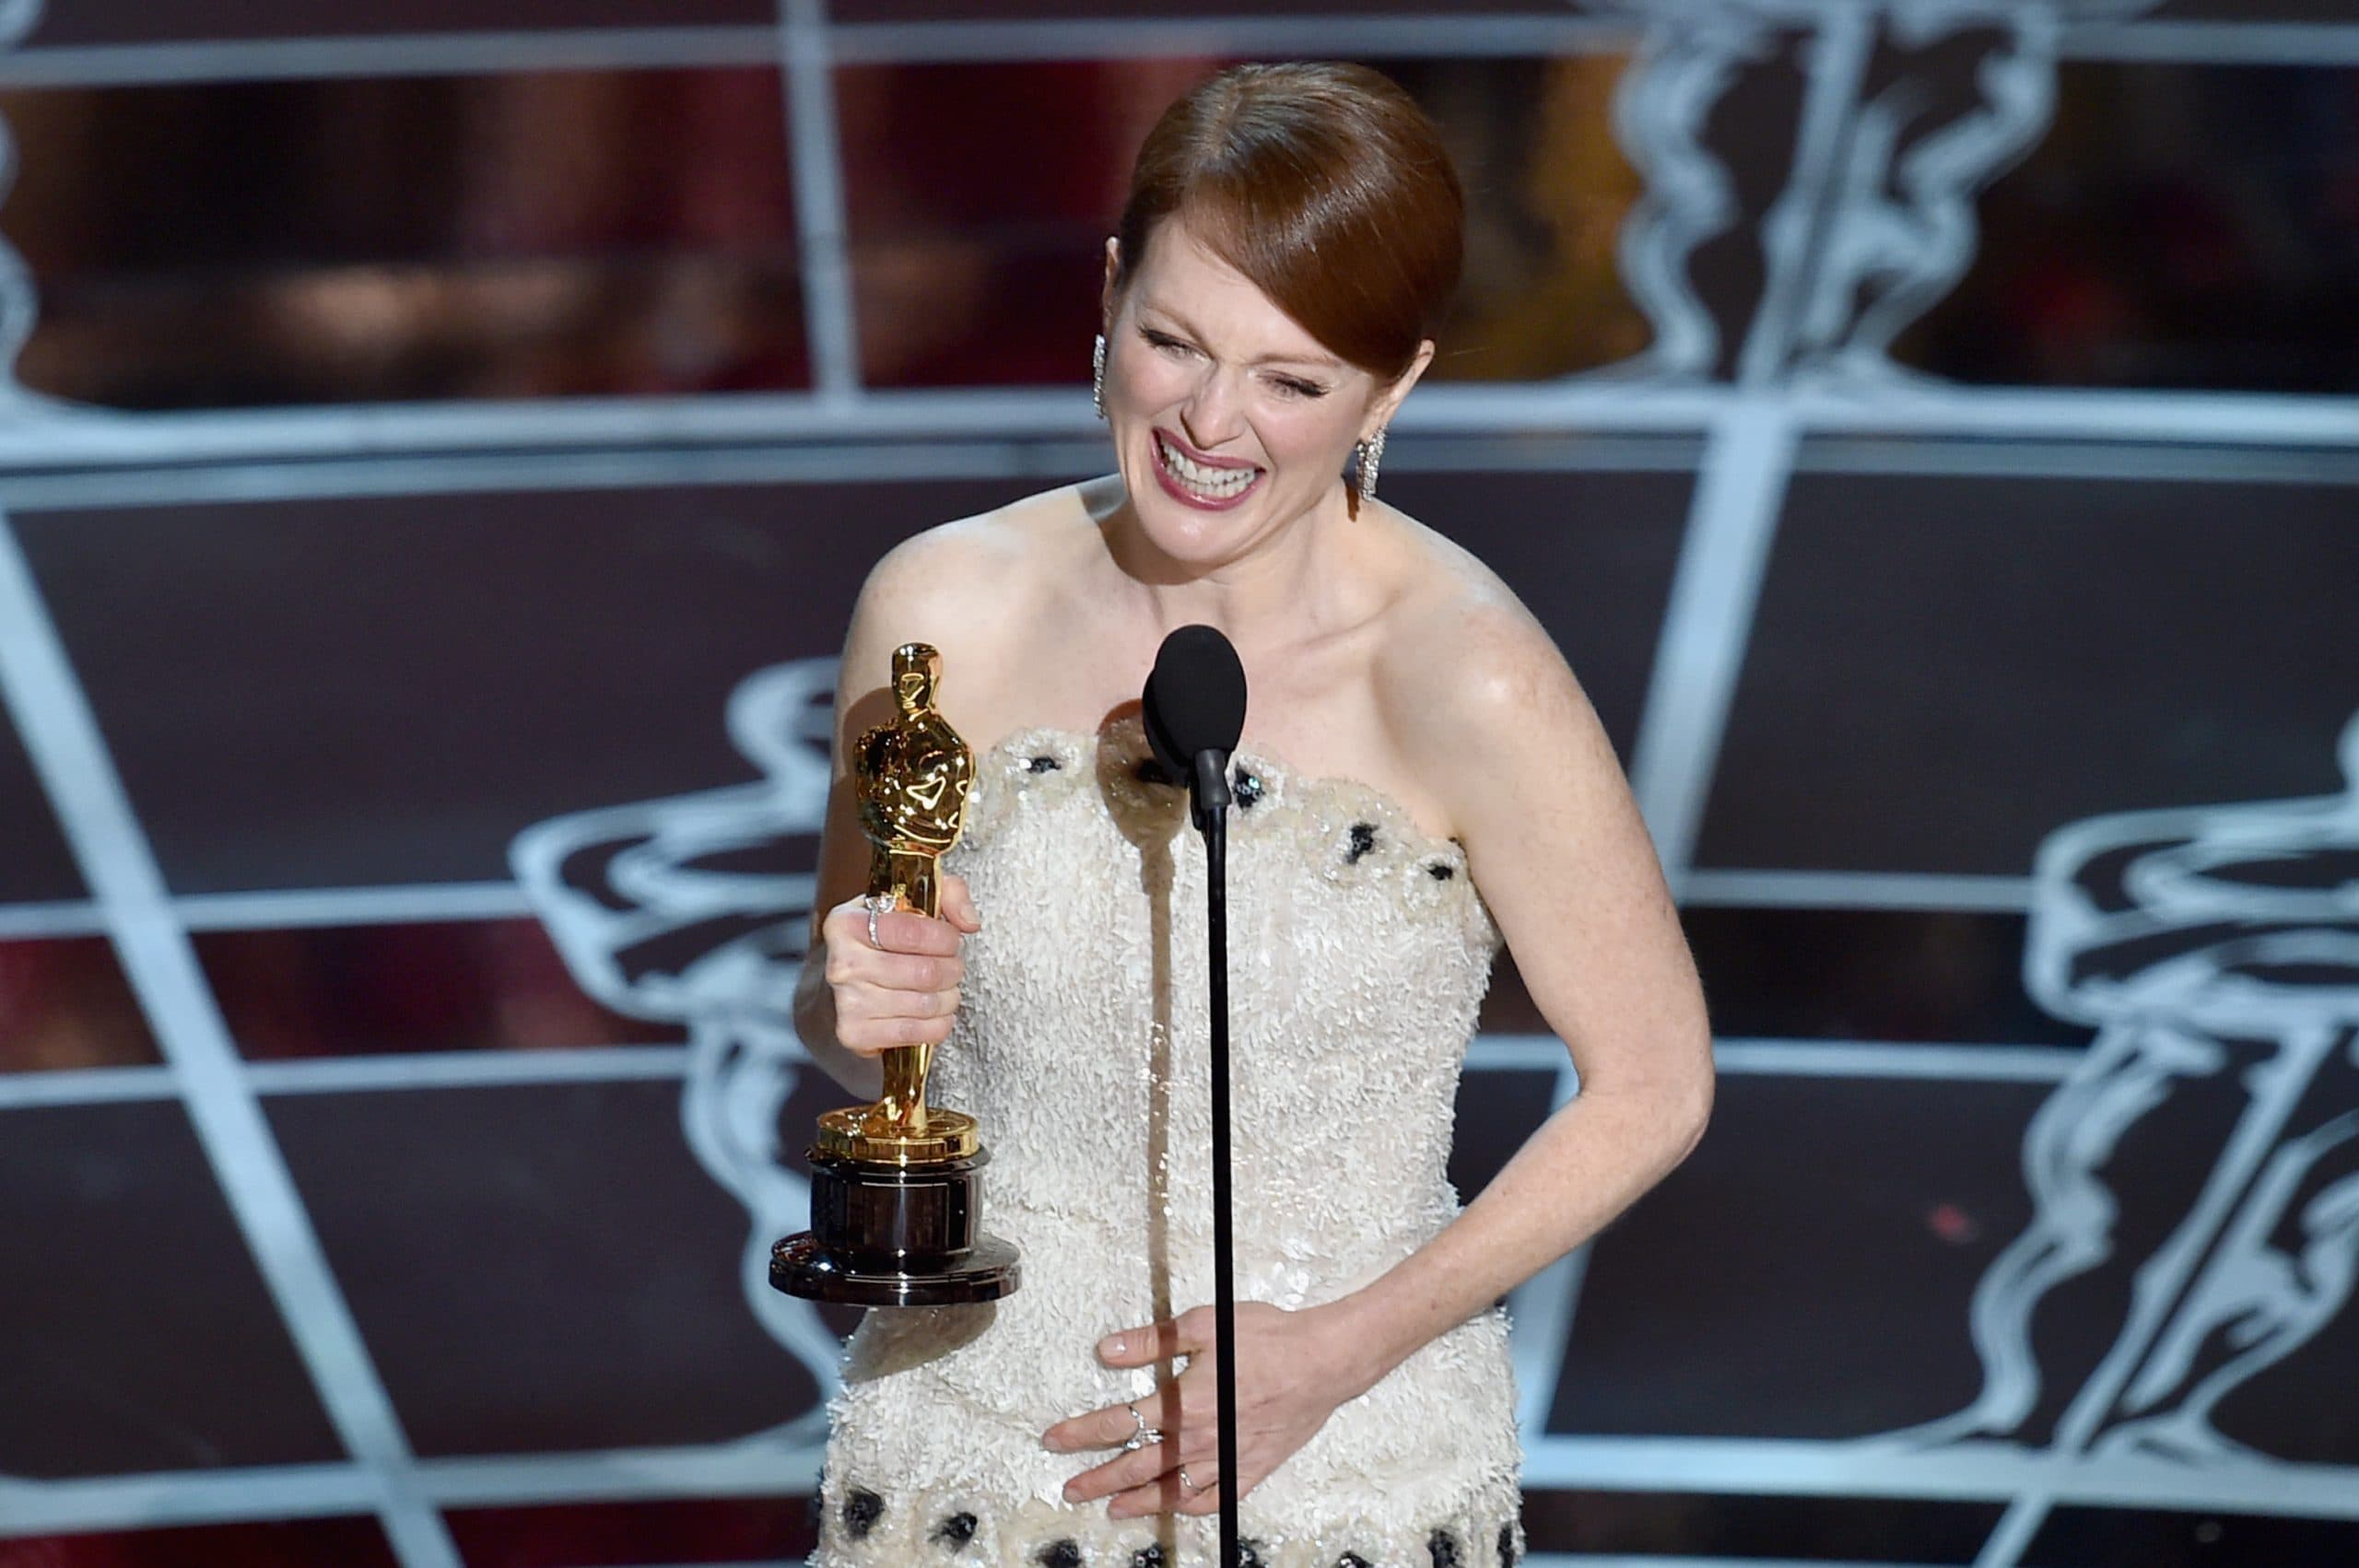 HOLLYWOOD, CA - FEBRUARY 22:  Actress Julianne Moore accepts the Best Actress in a Leading Role Award for "Still Alice" onstage during the 87th Annual Academy Awards at Dolby Theatre on February 22, 2015 in Hollywood, California.  (Photo by Kevin Winter/Getty Images)